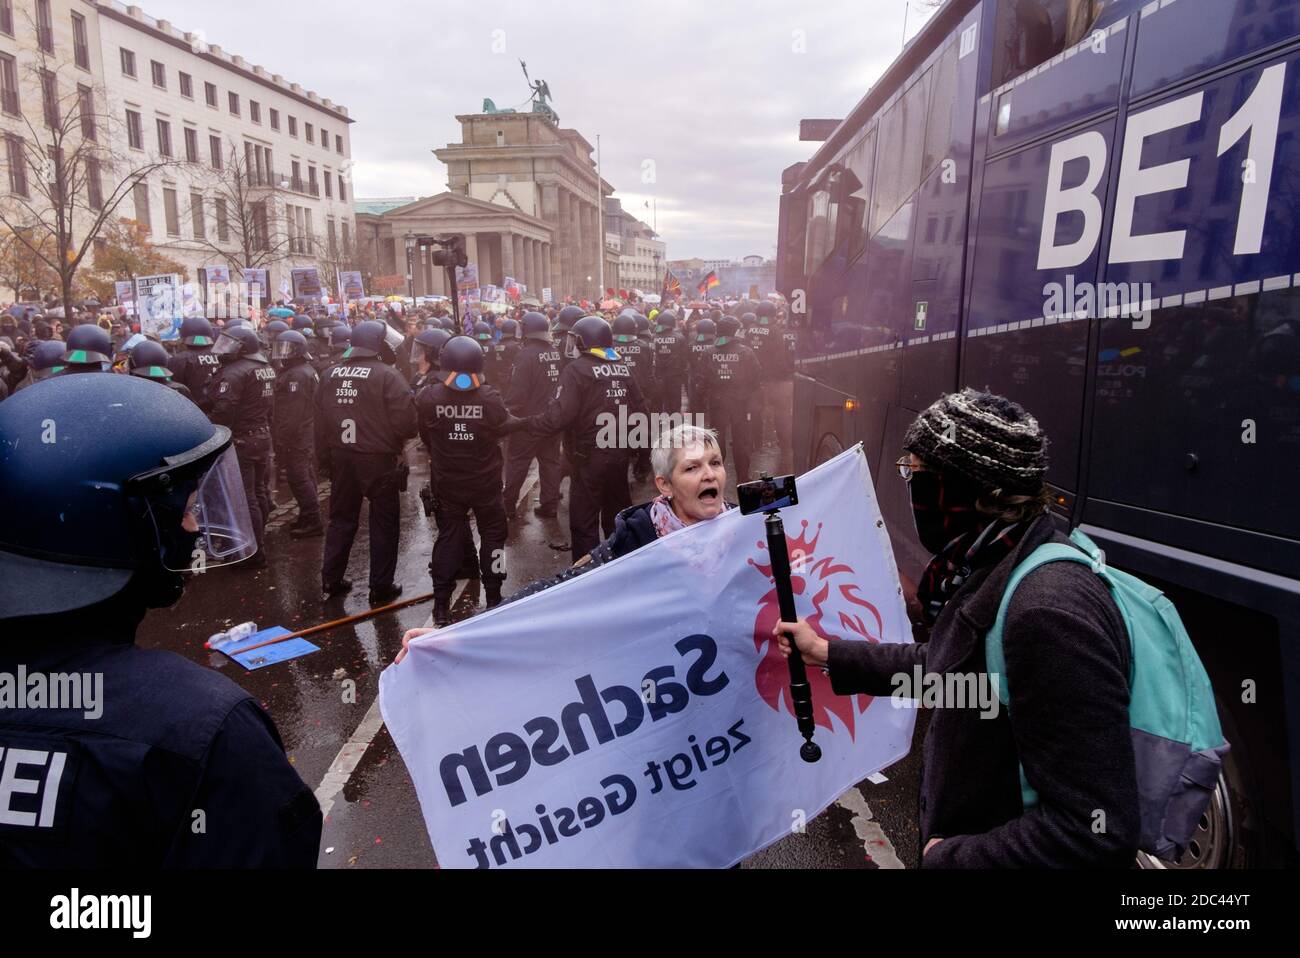 Berlin, Berlin, Germany. 18th Nov, 2020. Police officers try to displace protesters during the use of water cannons in front of Brandenburg Gate after heterogeneous groups around Corona deniers, conspiracy theorists and right-wing extremists called for blocking access to German Government Buildings. Both the Bundestag and the Bundesrat vote on planned new regulations of the infection protection law on November 18, 2020. Credit: Jan Scheunert/ZUMA Wire/Alamy Live News Stock Photo